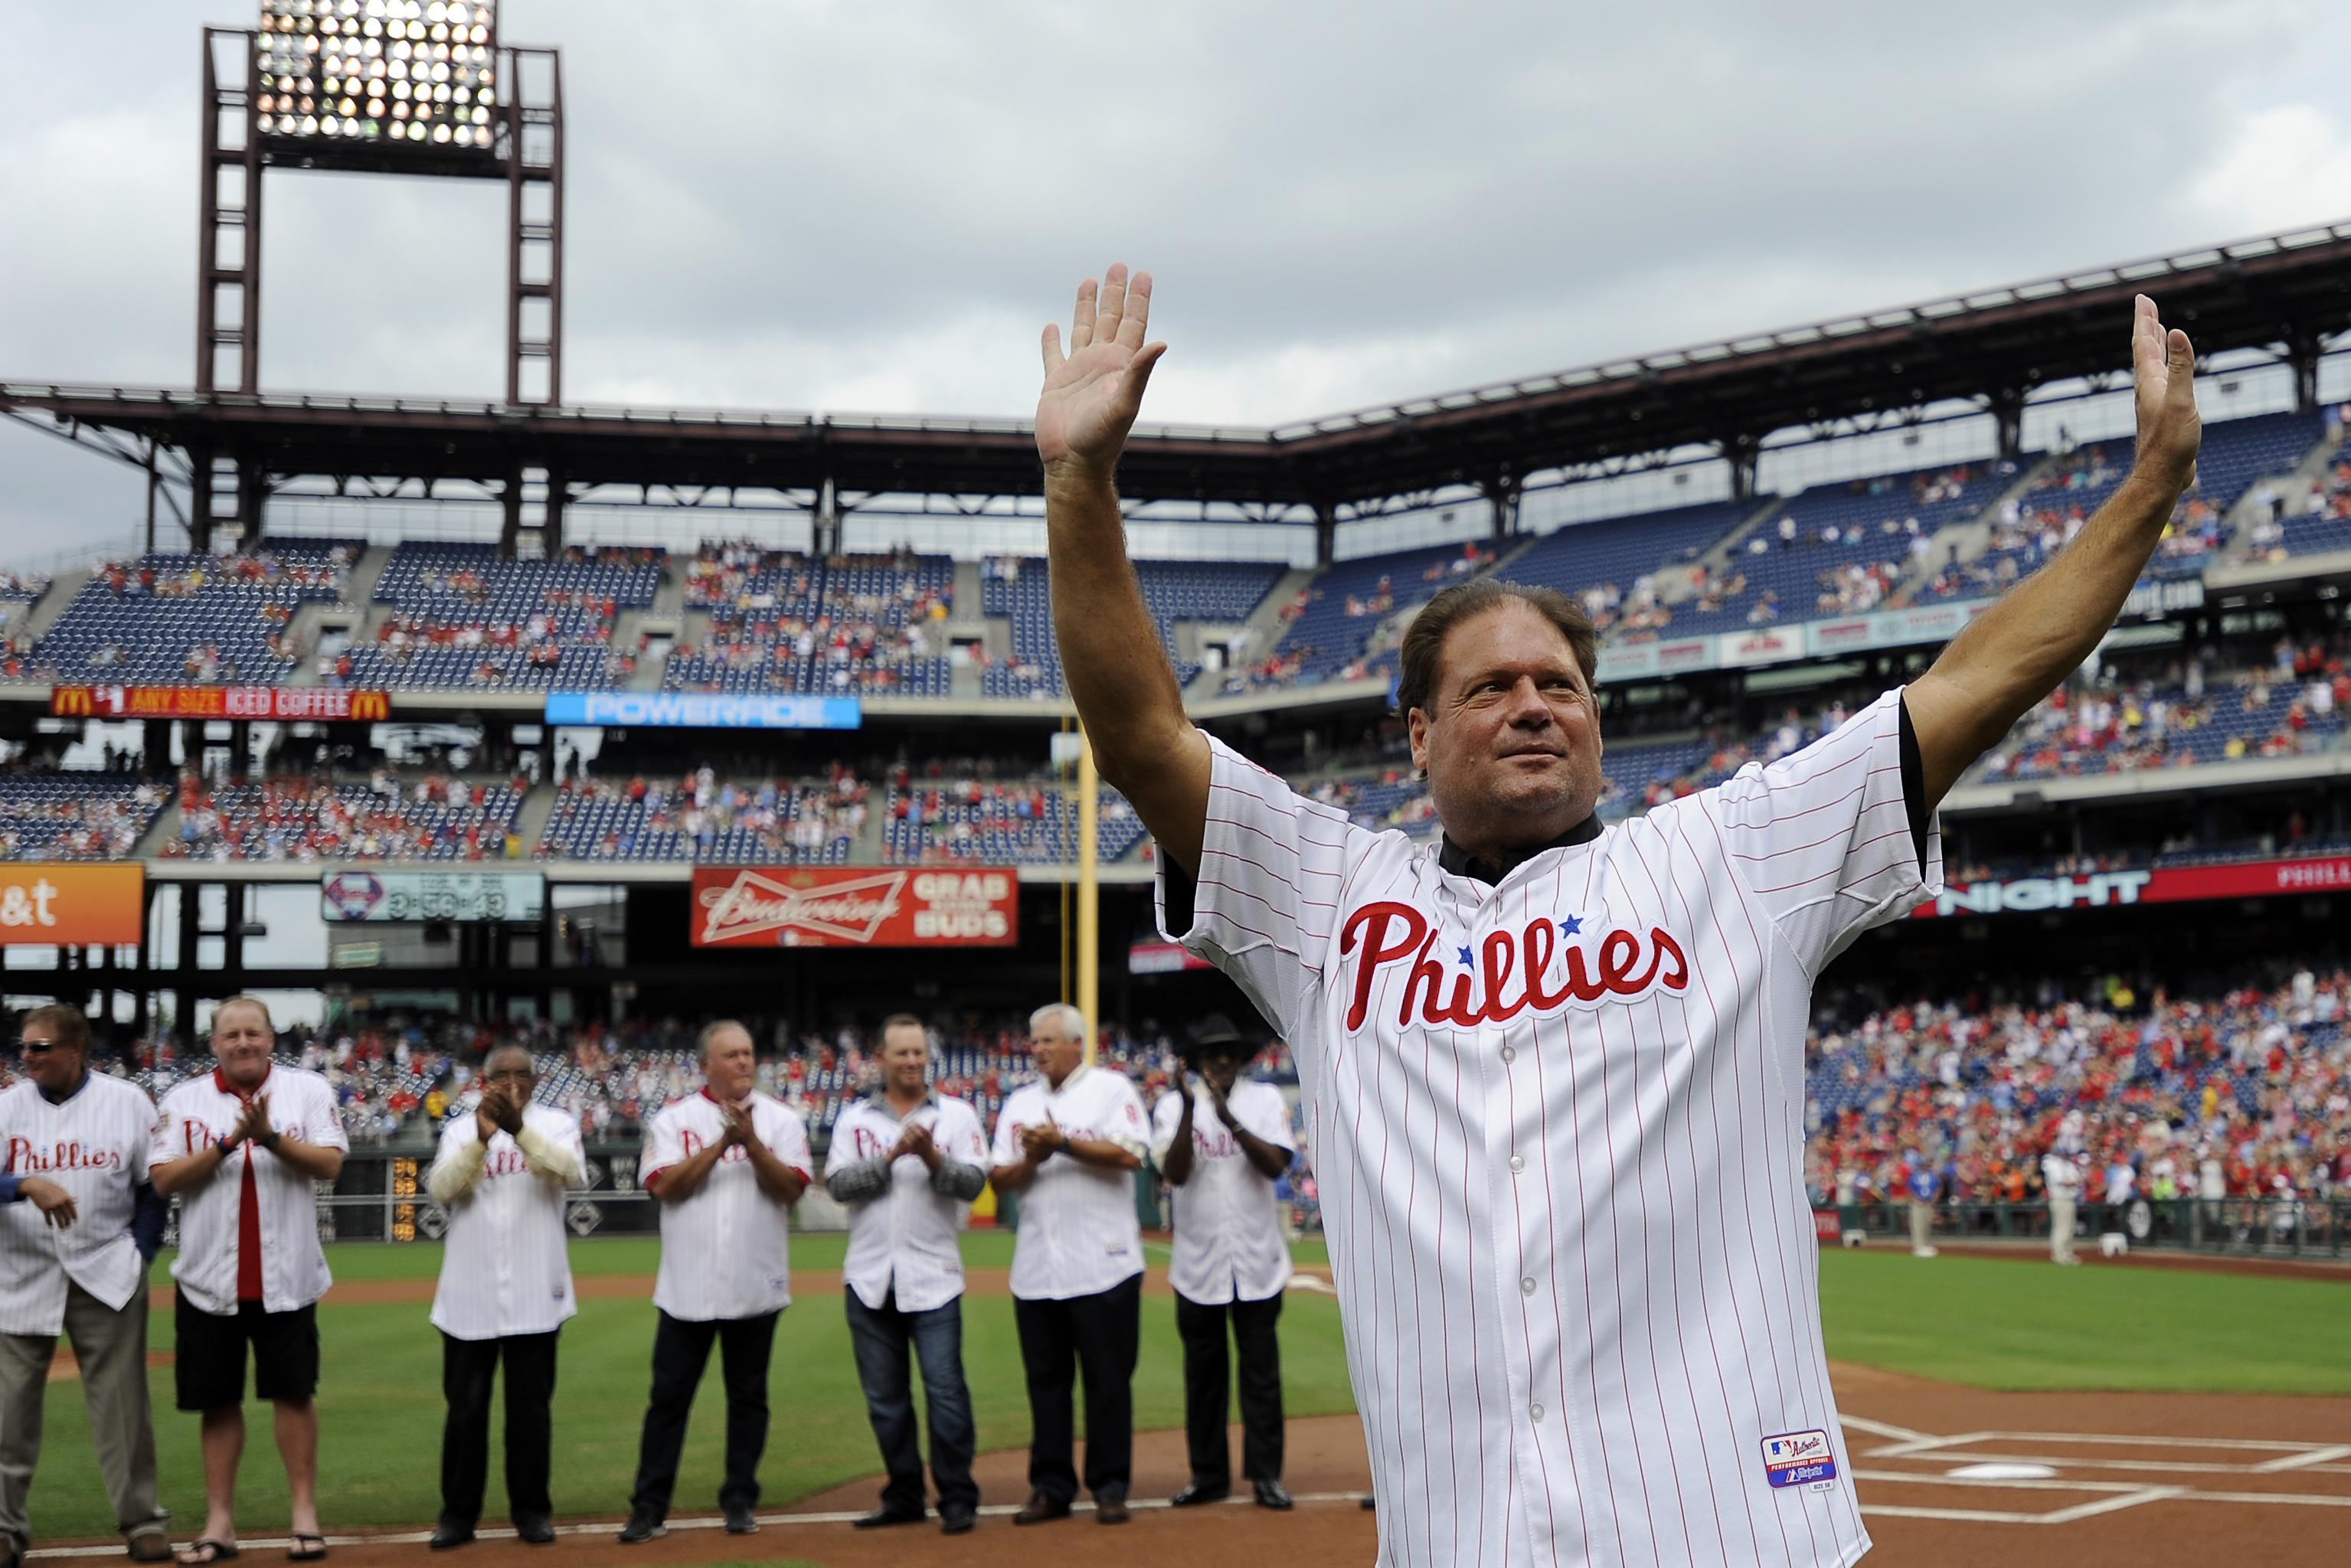 The 1993 @phillies were one of the most beloved teams in